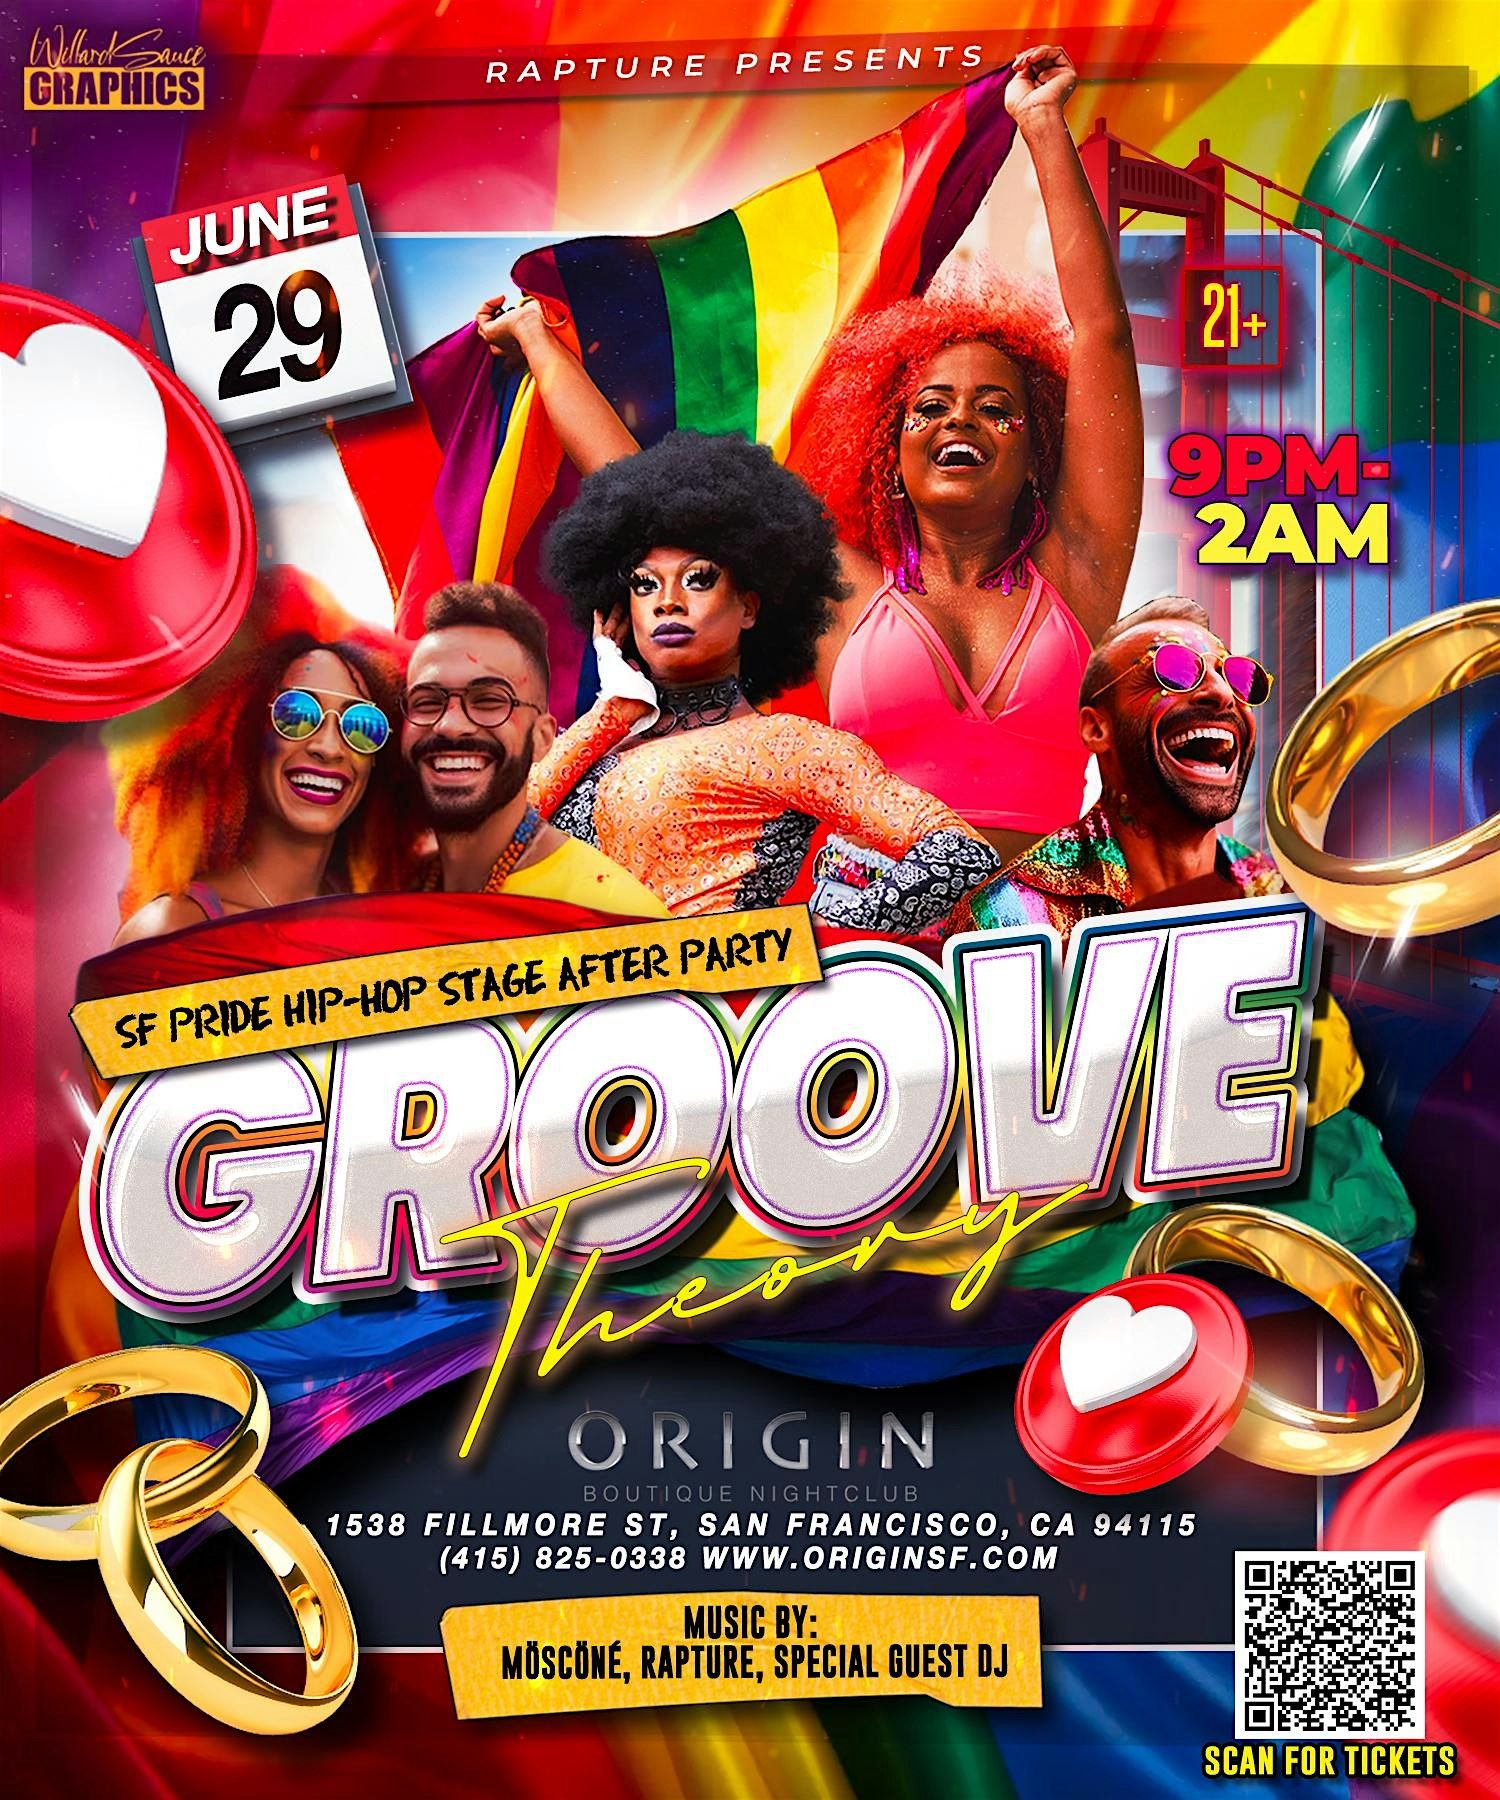 Groove Theory  - San Francisco  Pride Hip-Hop Stage After Party